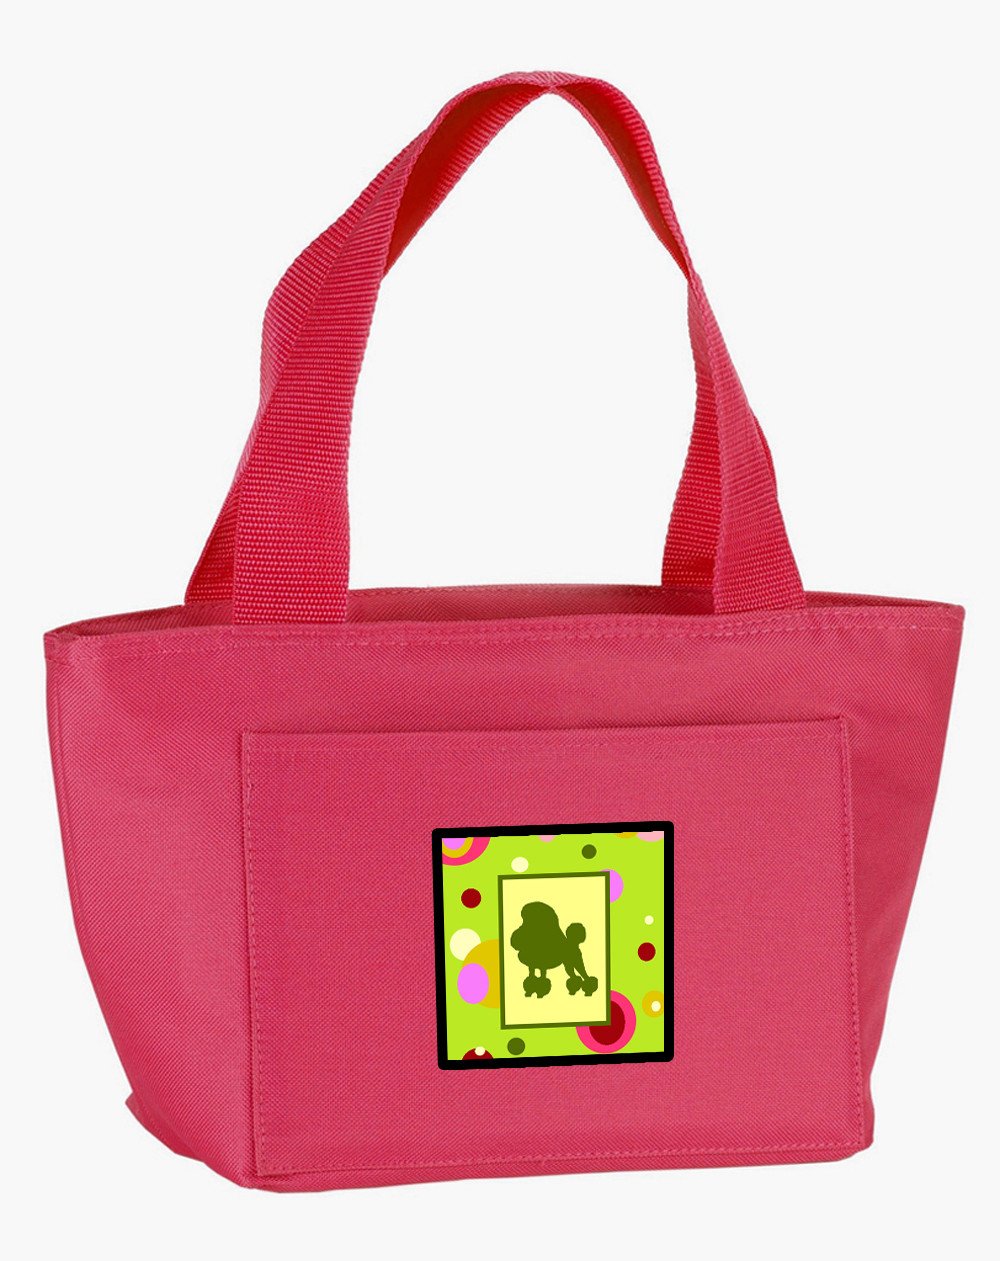 Lime Green Dots Poodle Lunch Bag CK1106PK-8808 by Caroline's Treasures